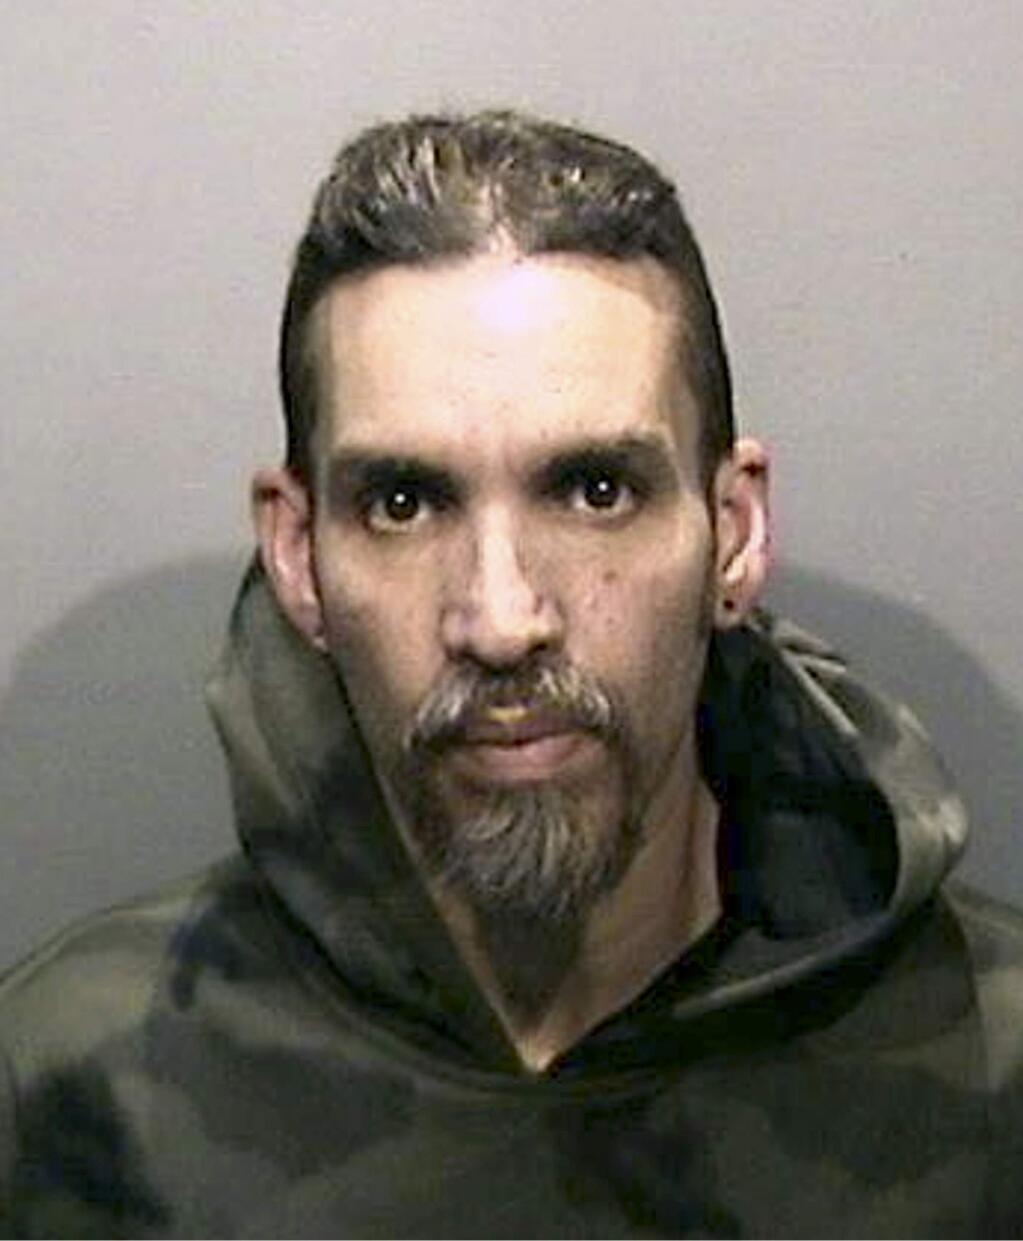 FILE - This June 5, 2017, file photo released by the Alameda County Sheriff's Office shows Derick Almena at Santa Rita Jail in Alameda County, Calif. An Alameda County Superior Court judge on Tuesday, Feb. 20, 2018, set a July 16 trial date for Almena and Max Harris, who the judge previously said had a 'substantial' role in managing the Ghost Ship warehouse.(Alameda County Sheriff's Office via AP, File)